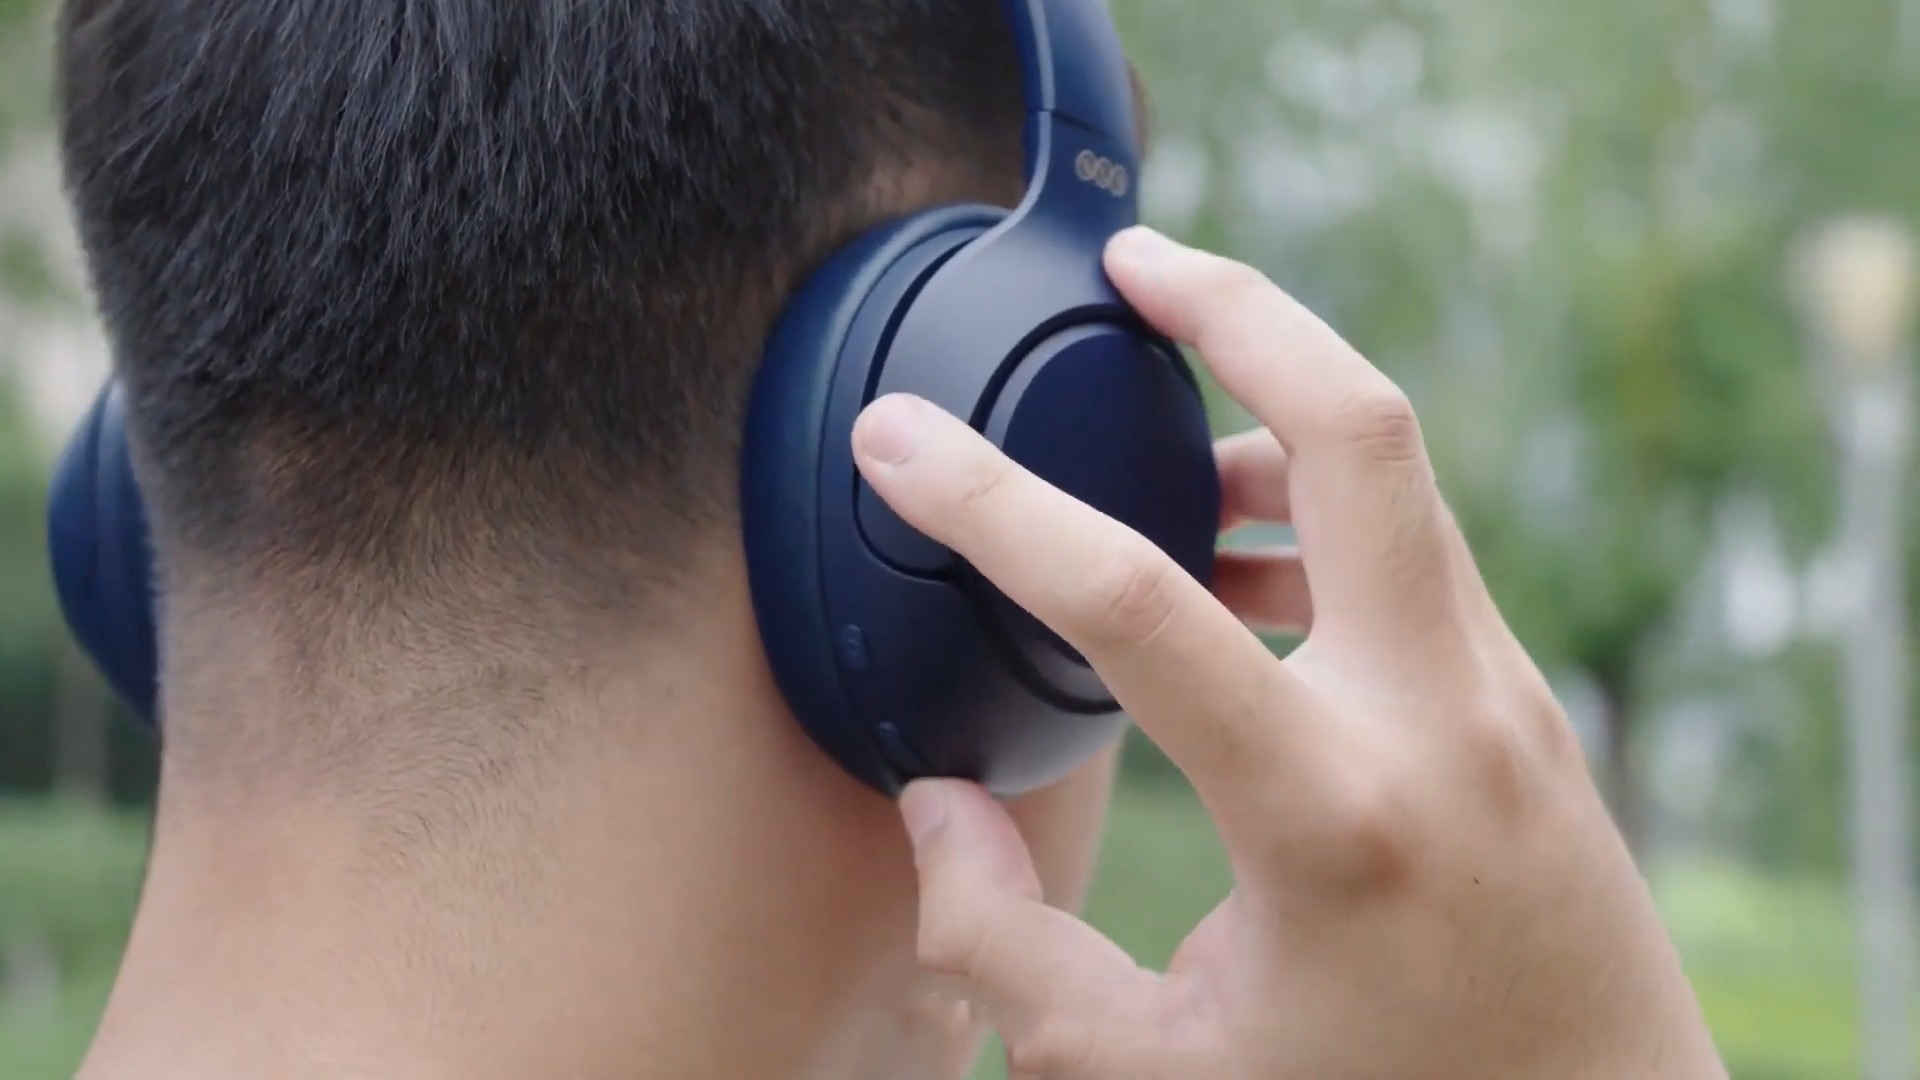 qcyglobal Quick review of the QCY H3 bluetooth wireless headphones! #